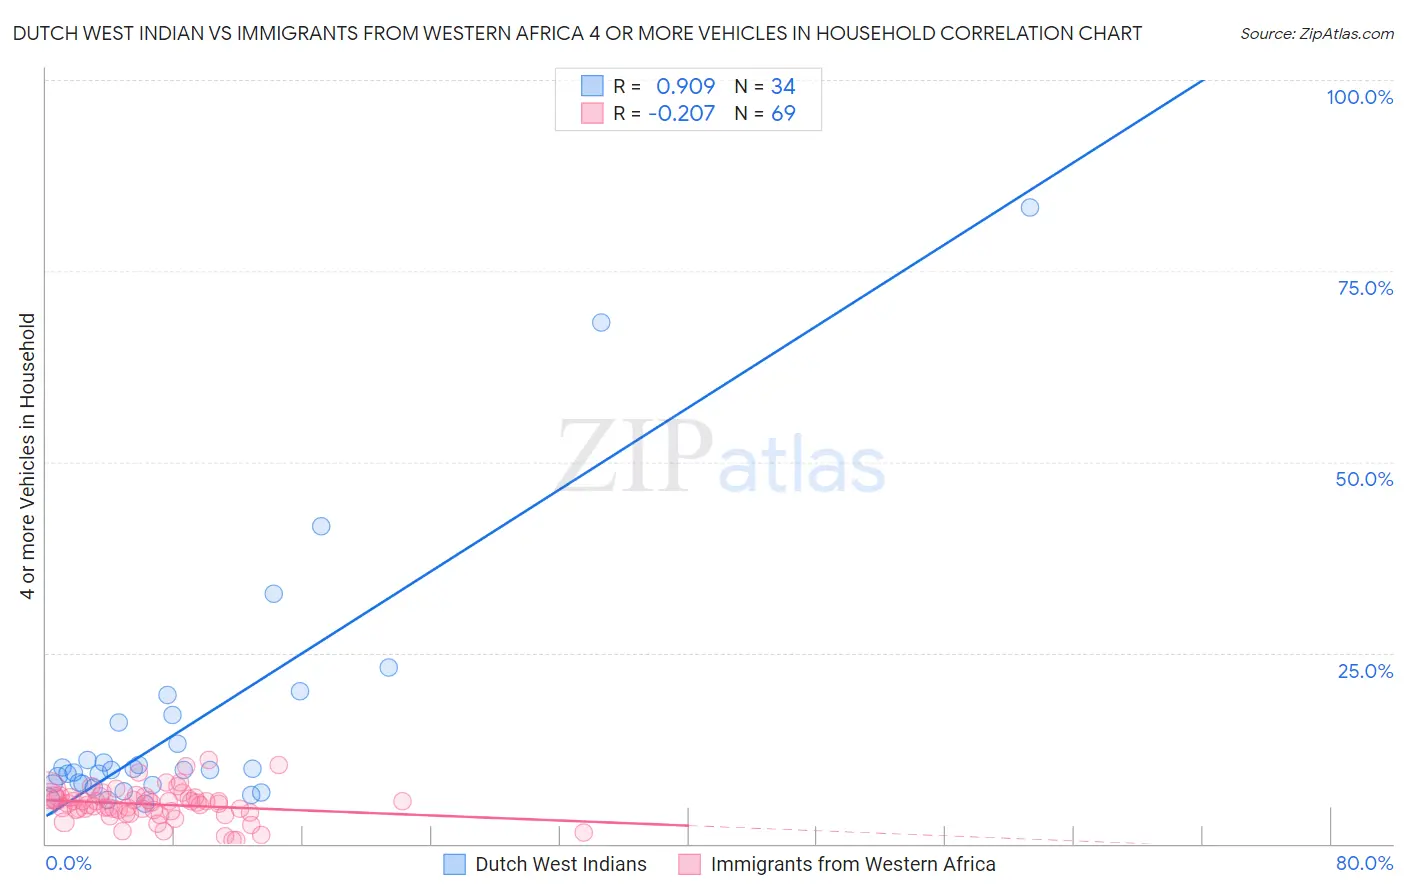 Dutch West Indian vs Immigrants from Western Africa 4 or more Vehicles in Household